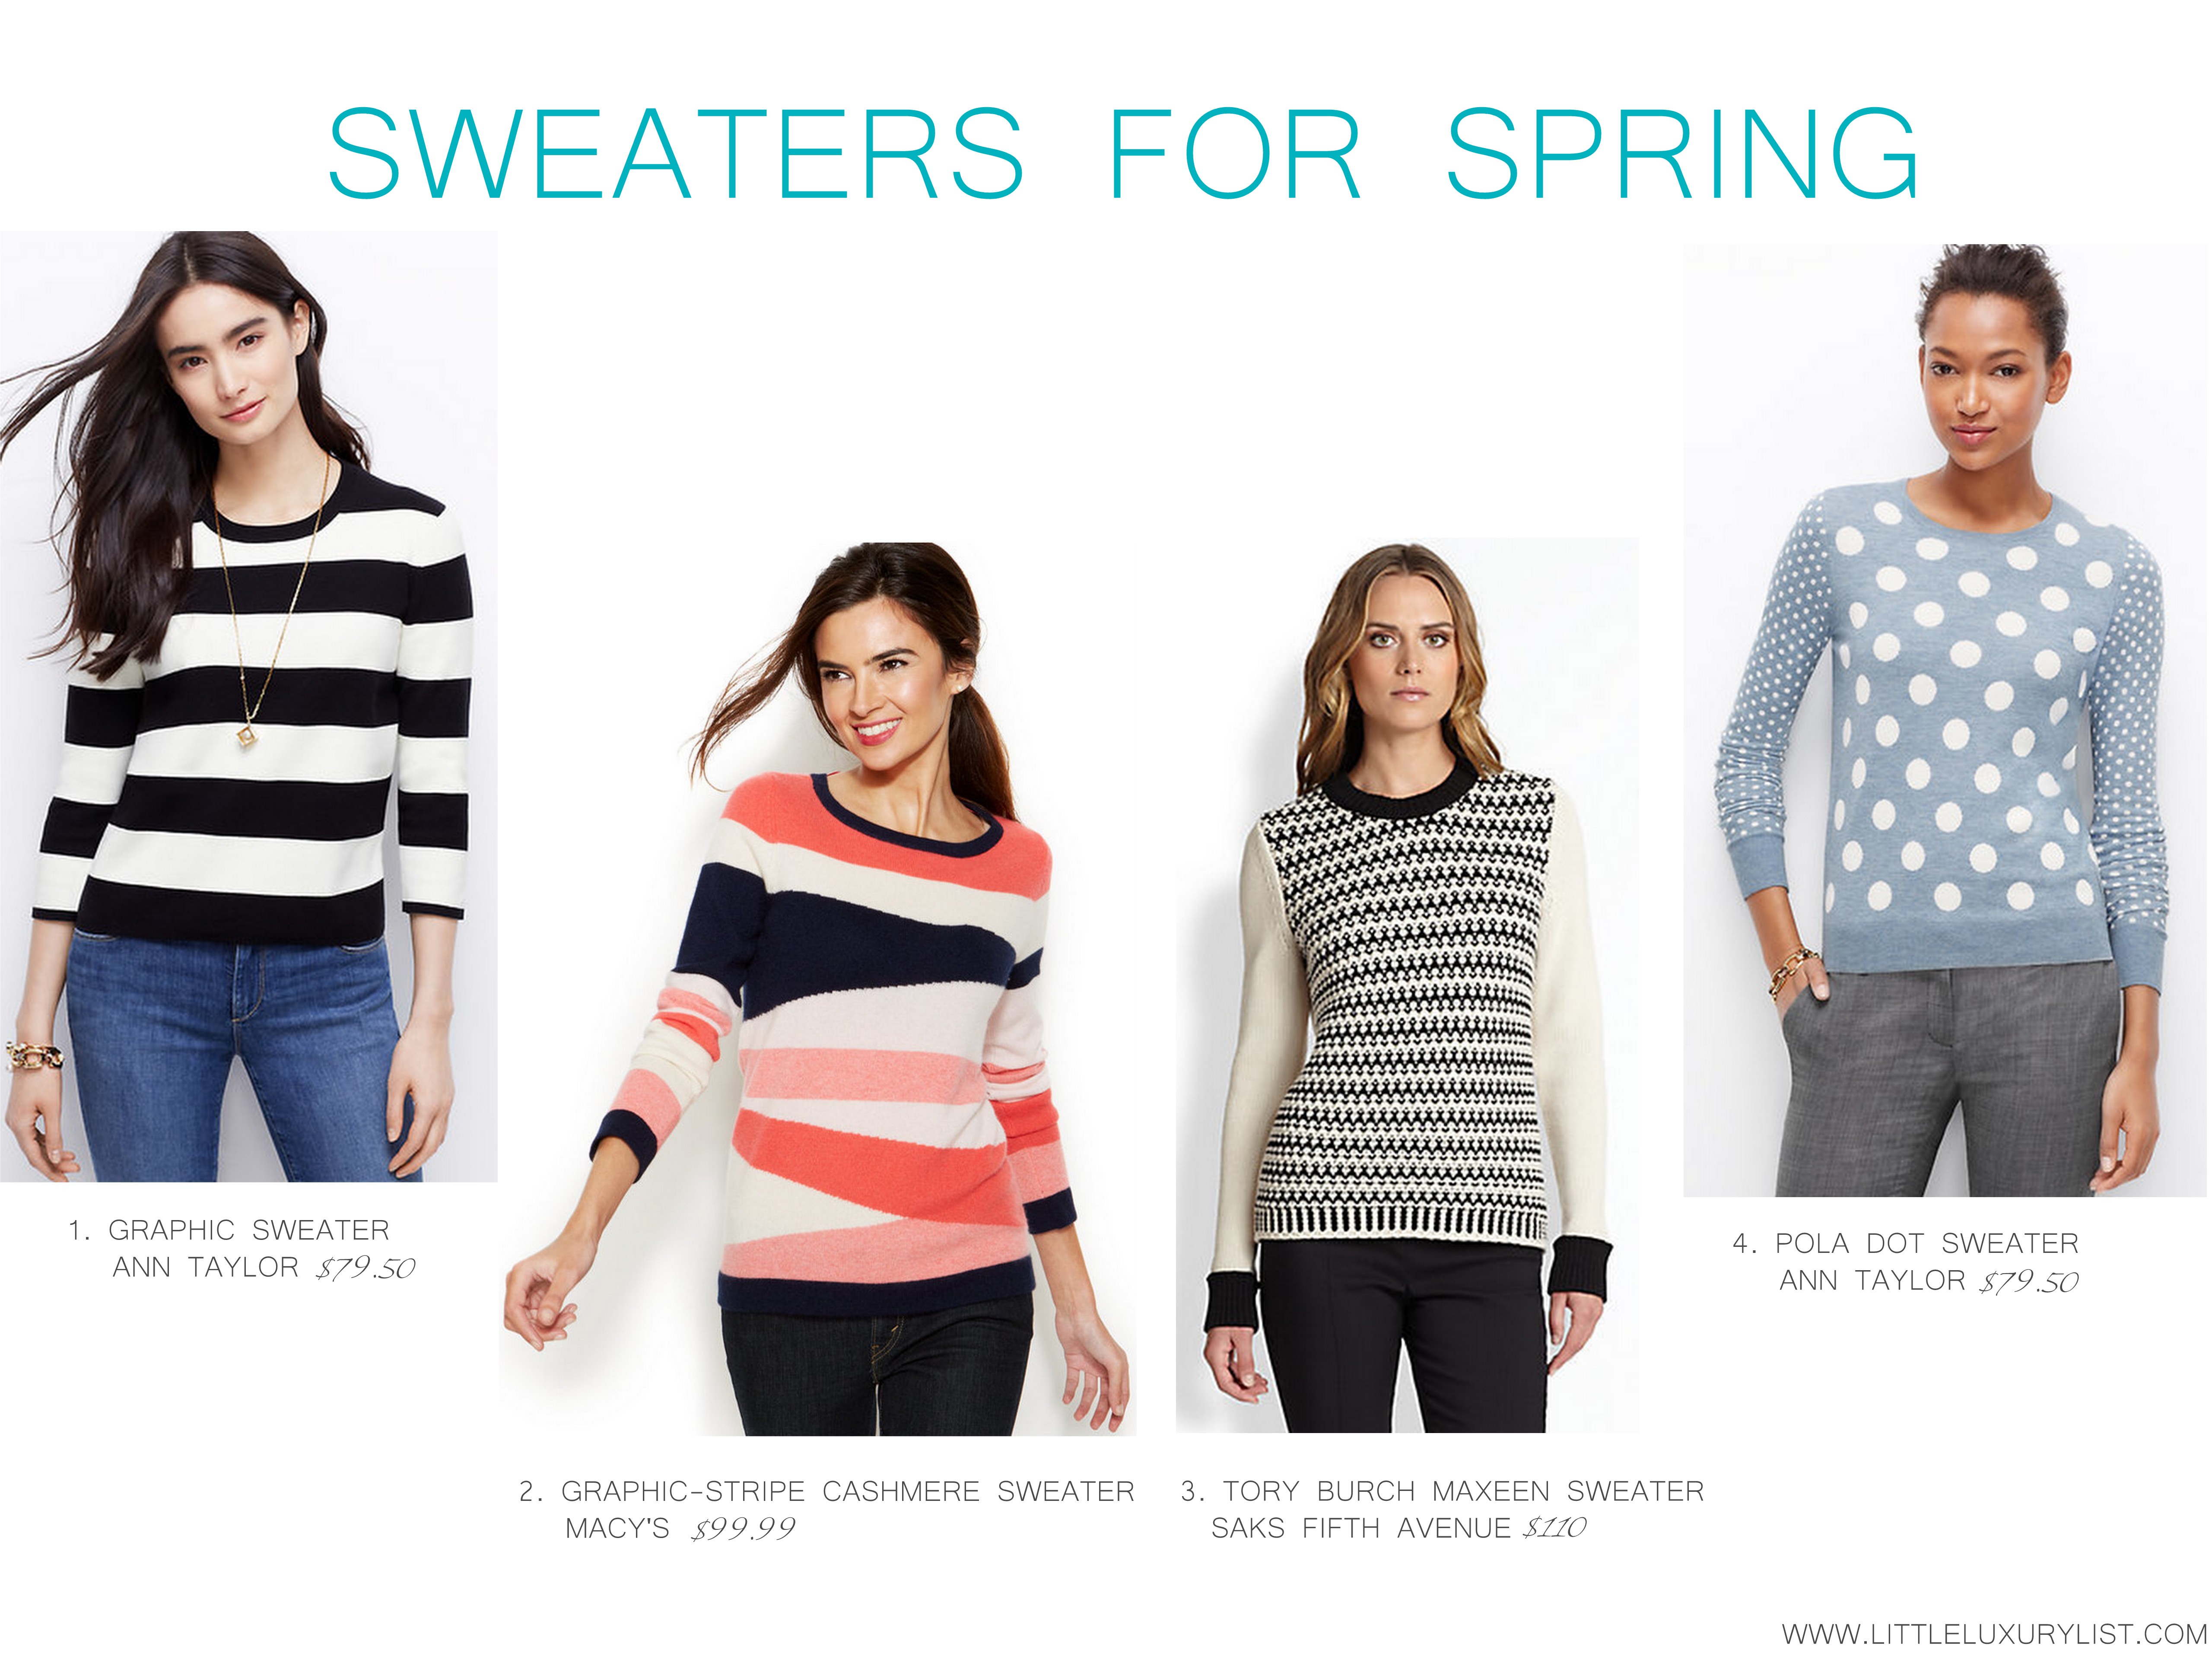 Sweaters for spring by little luxury list